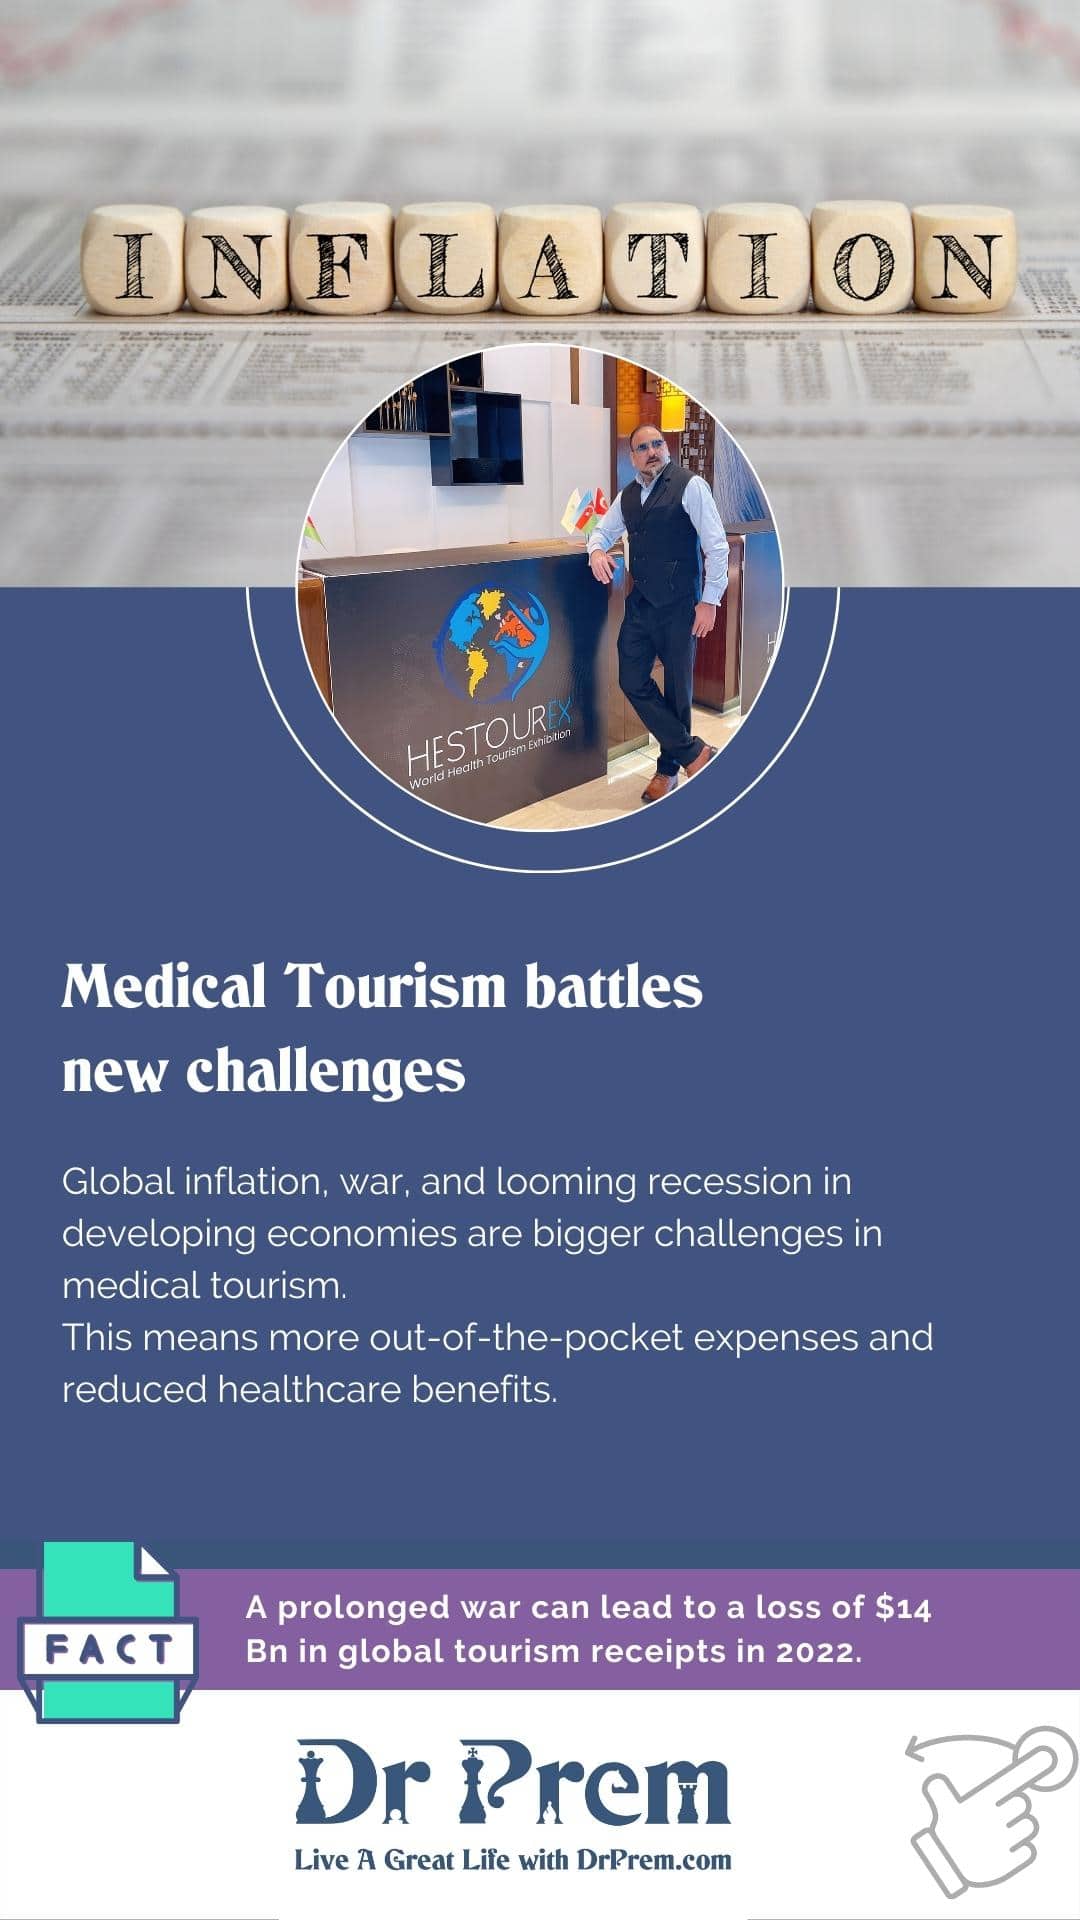 How do you think medical tourism is evolving Apart from Covid - 2